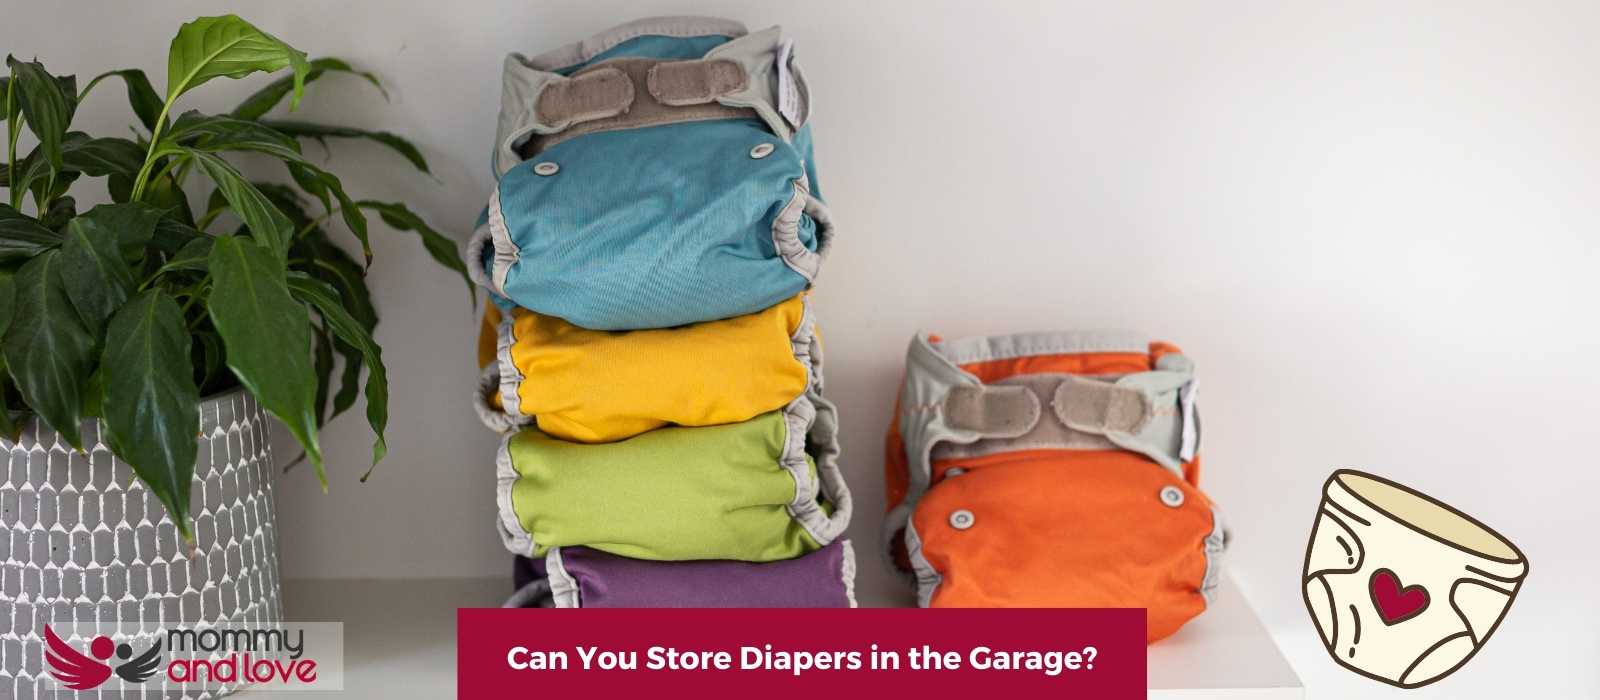 Can You Store Diapers in the Garage (1)